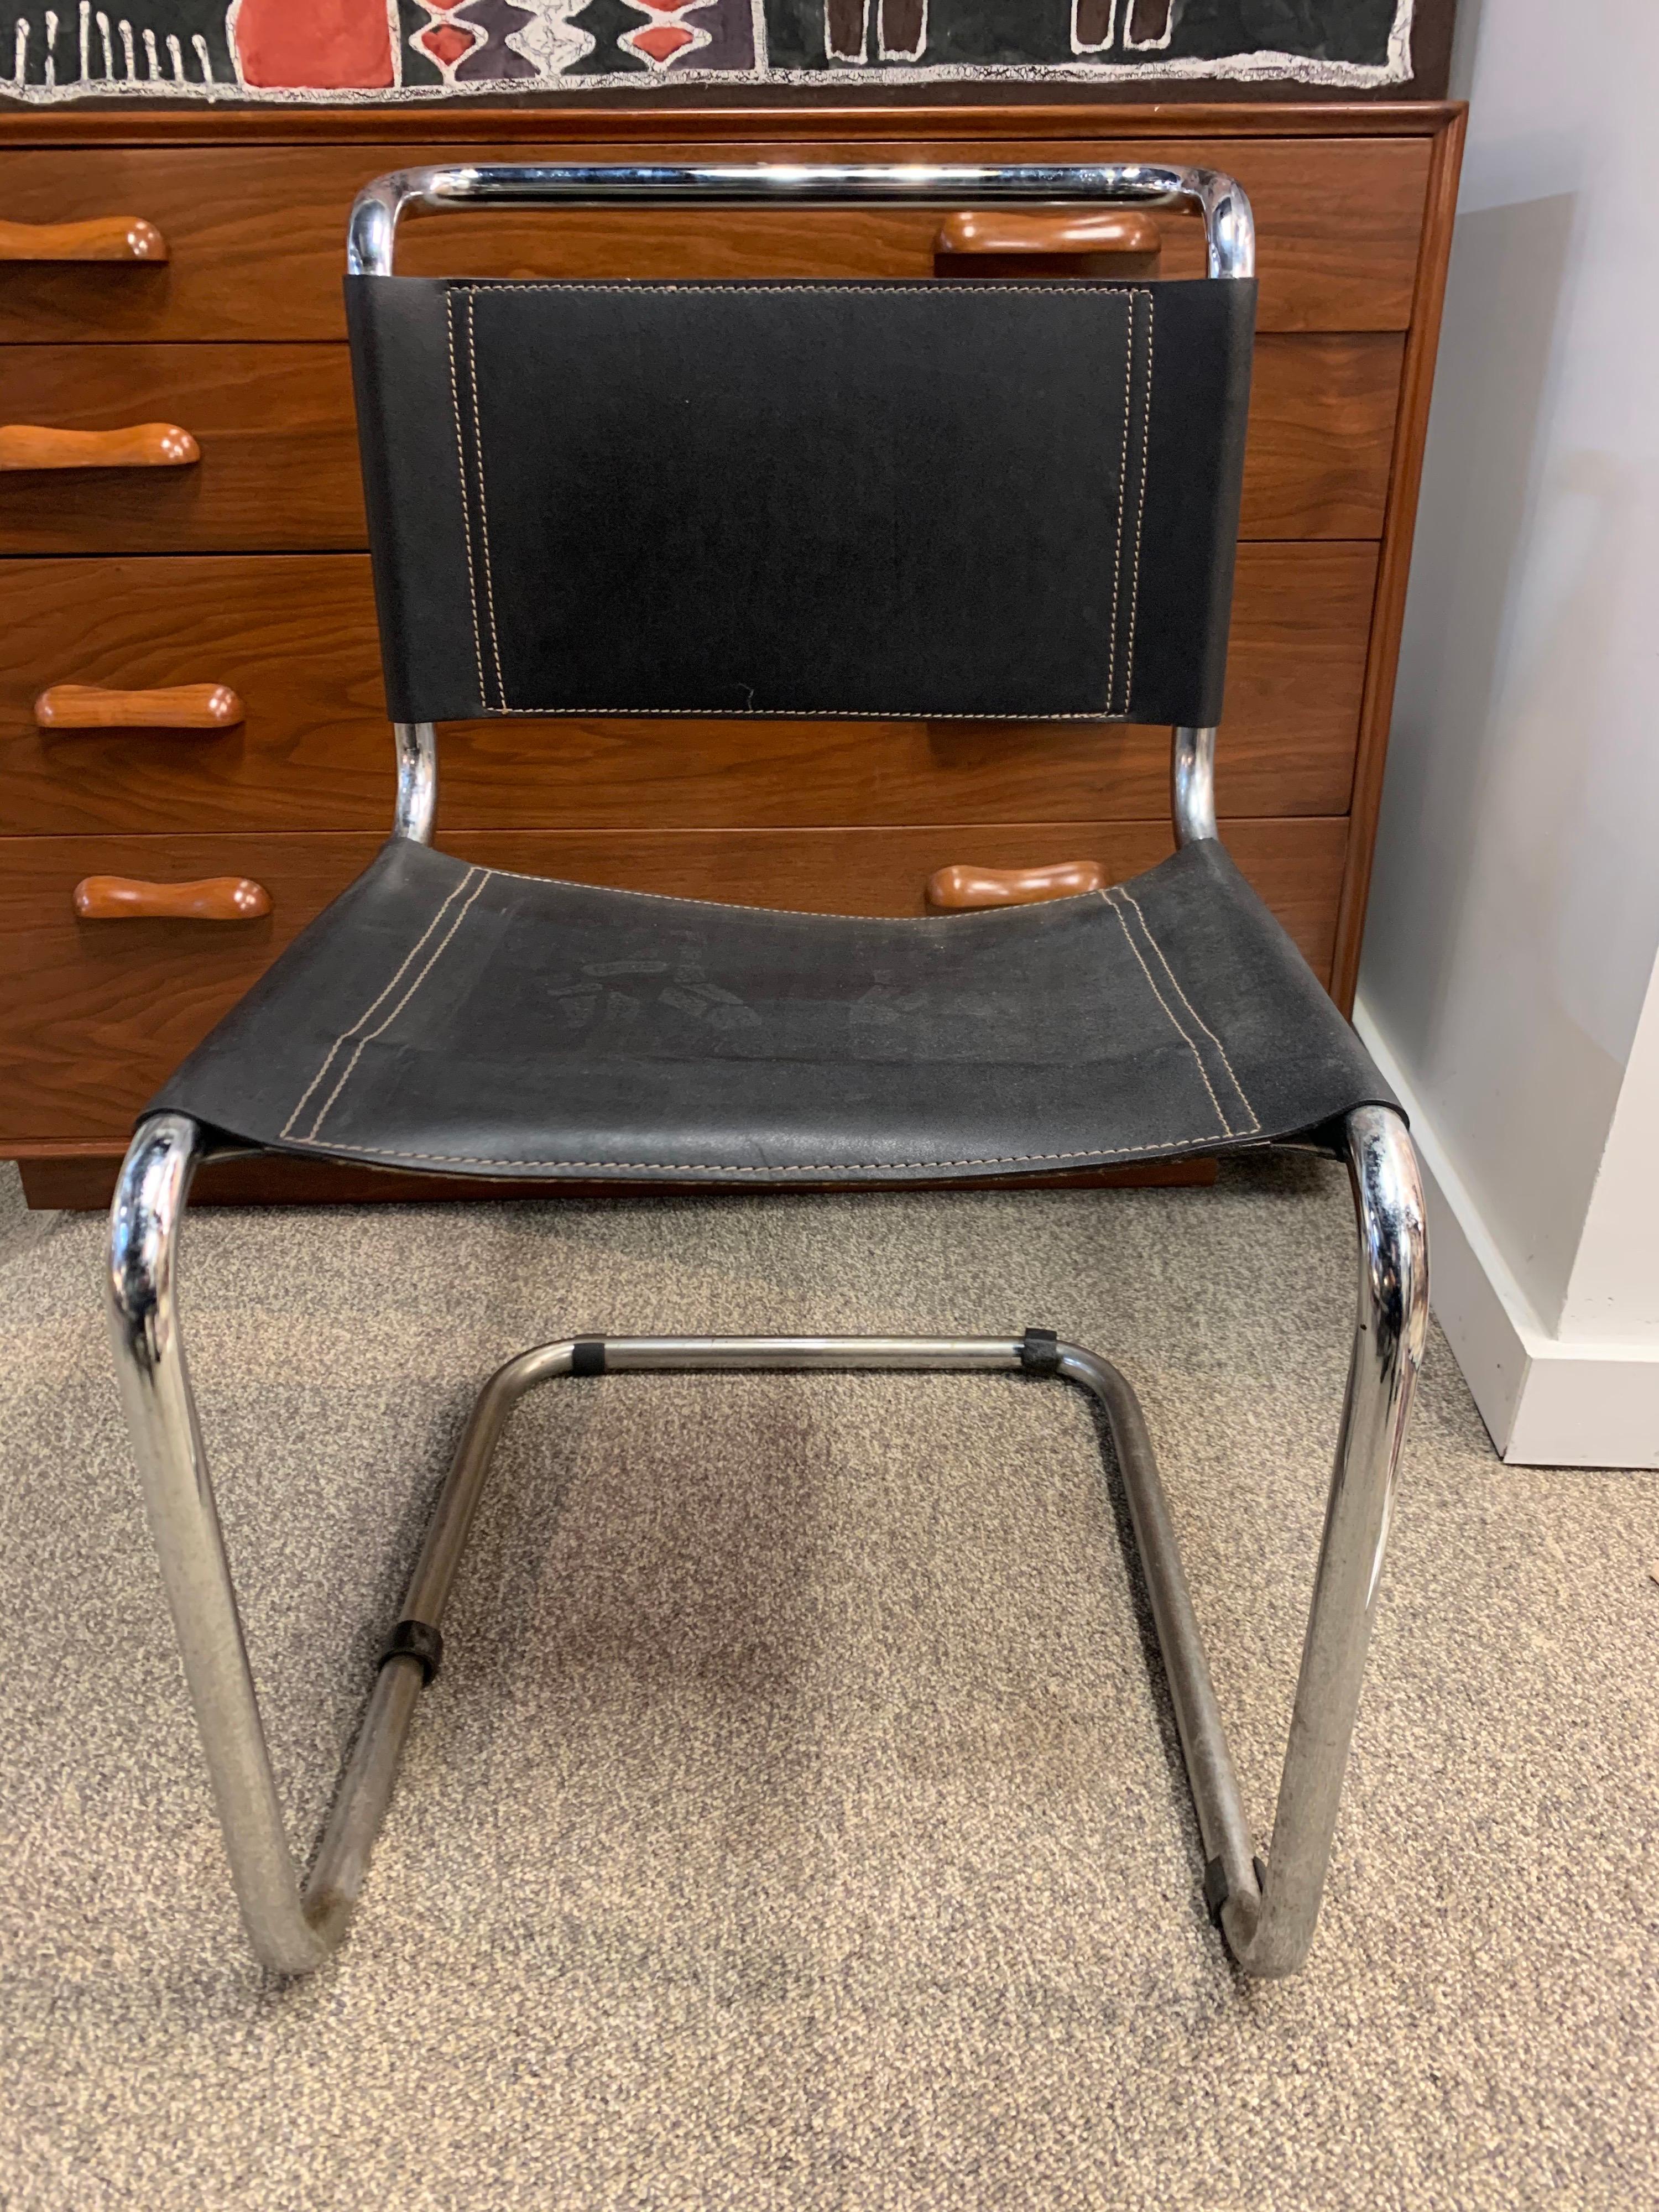 Iconic Mid-Century Modern tubular cantilever chairs with black seating surface, Circa 1970's and with normal age appropriate wear. Seating is some type of vinyl, not leather.